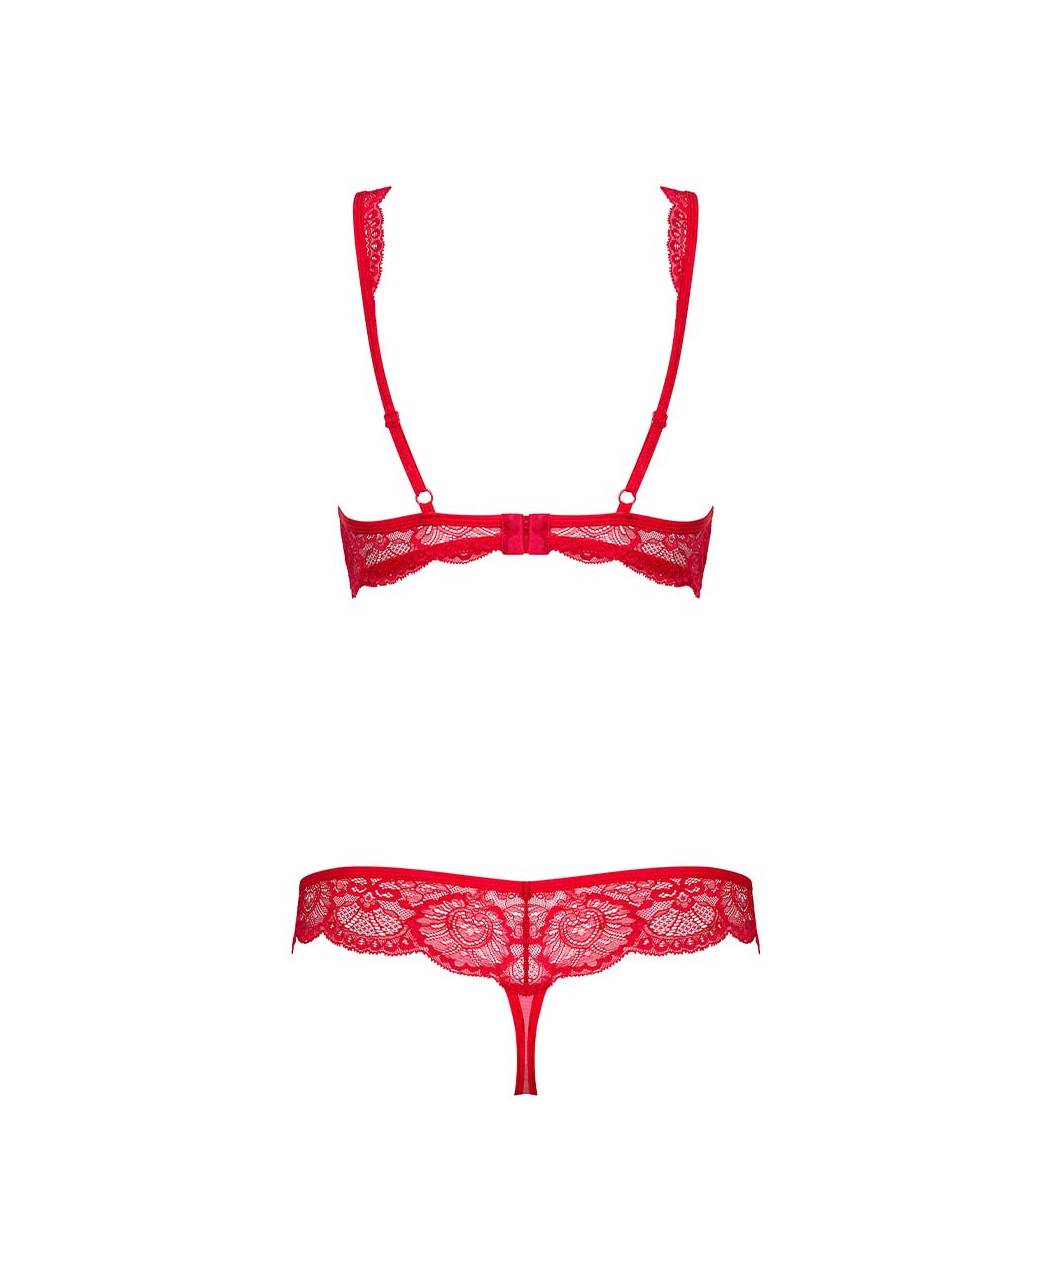 Obsessive Red Lace Two-piece Lingerie Set